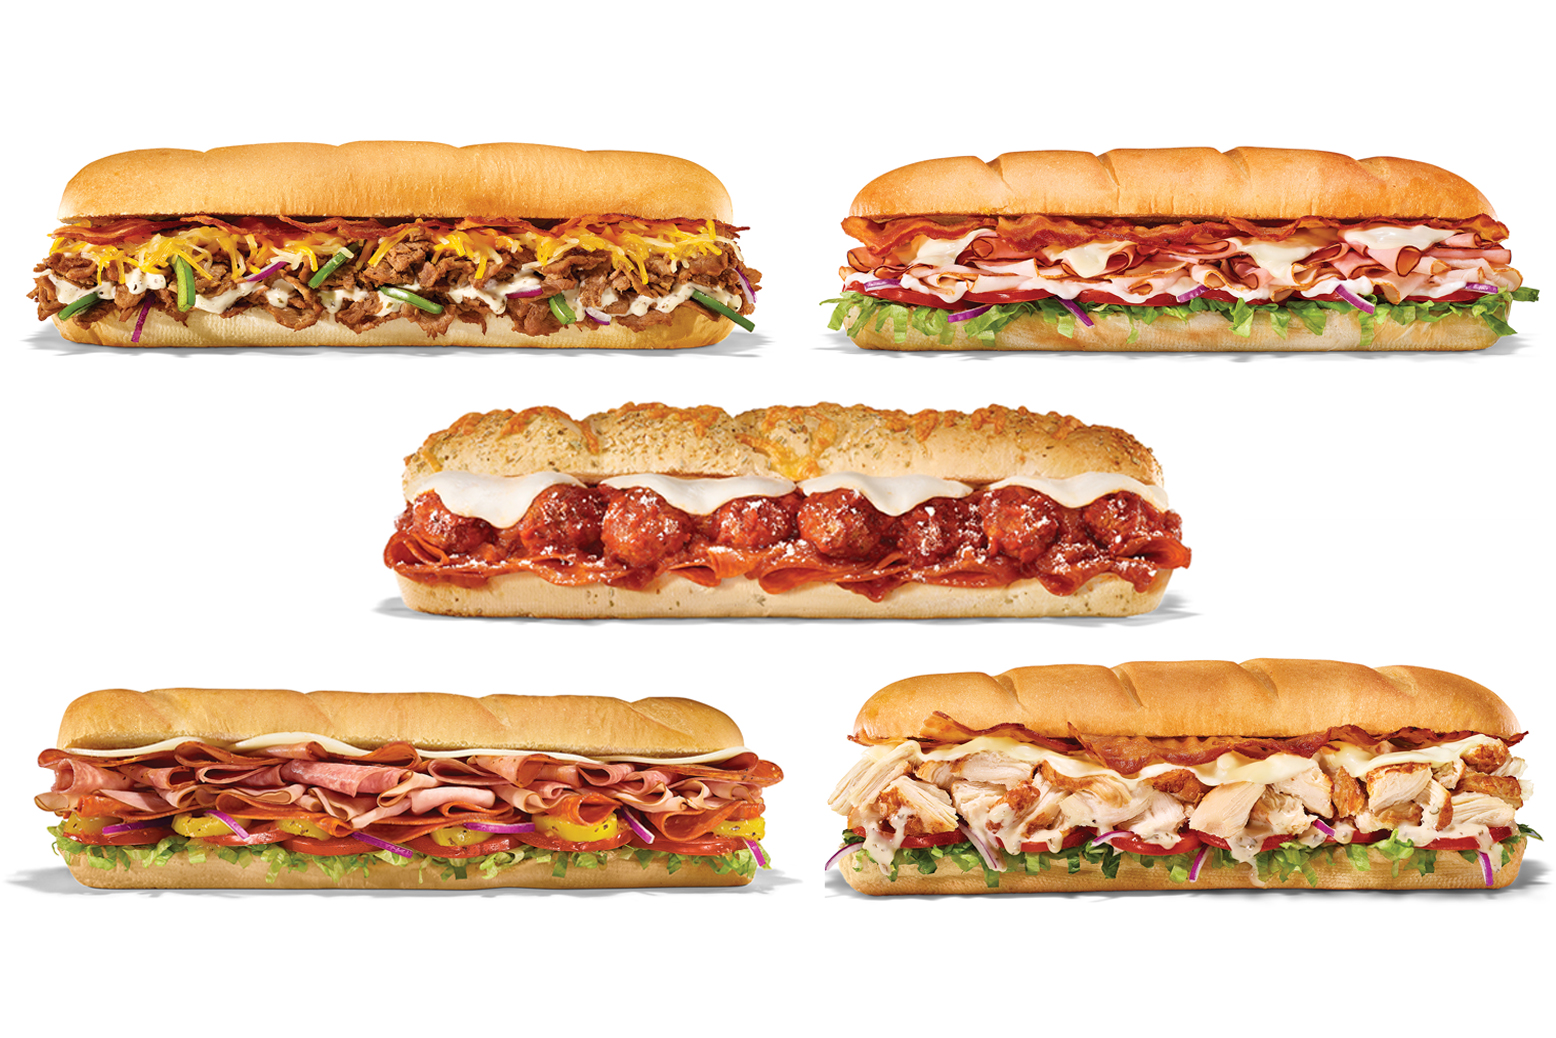 subway-is-giving-out-1-million-free-sandwiches-to-celebrate-their